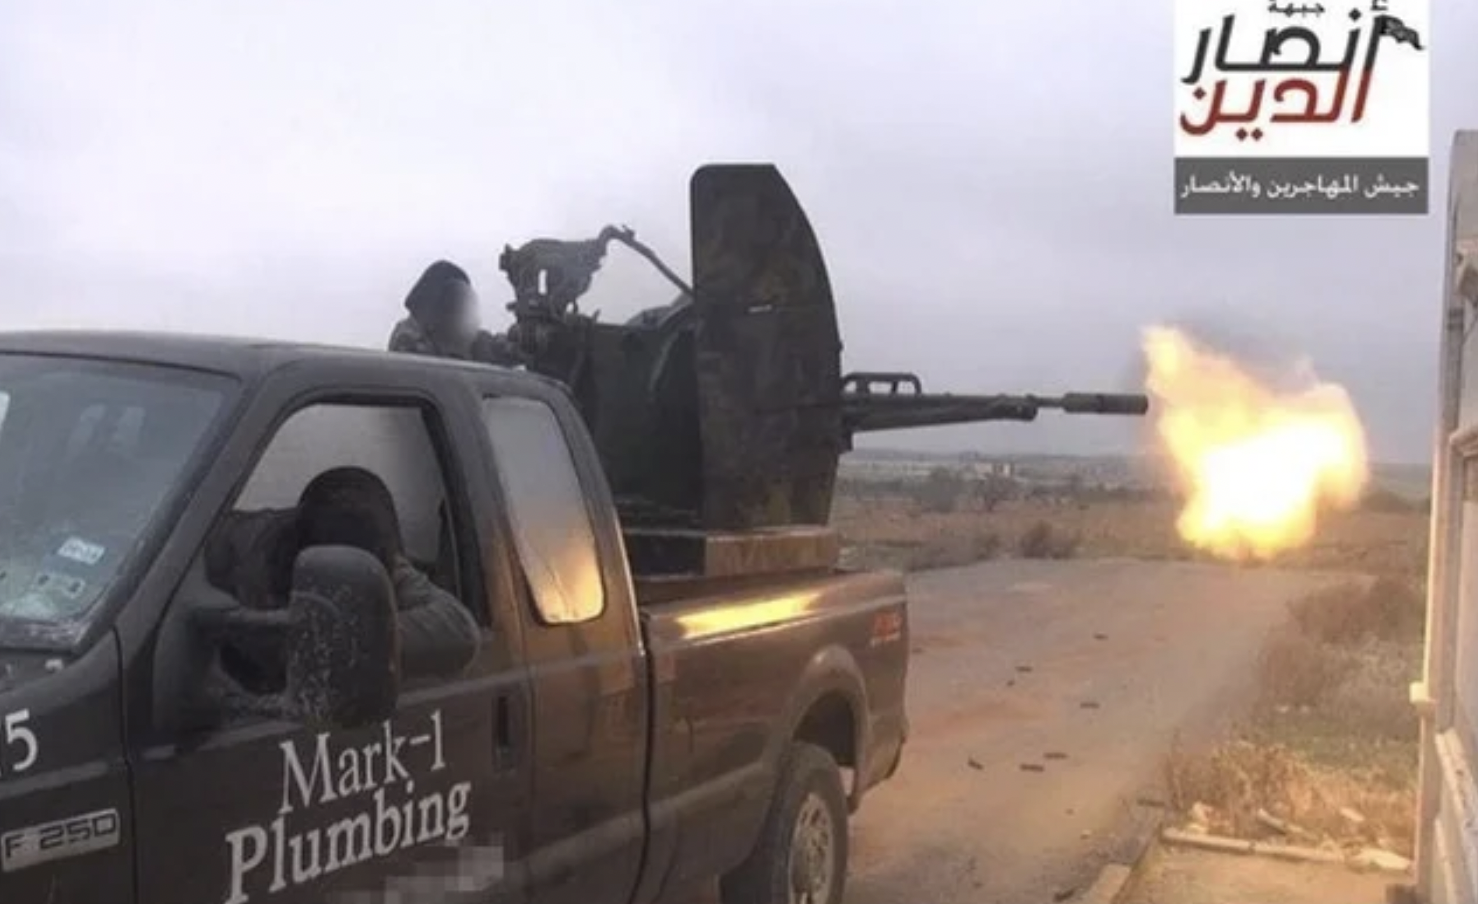 people having a crappy day - plumbing truck in syria